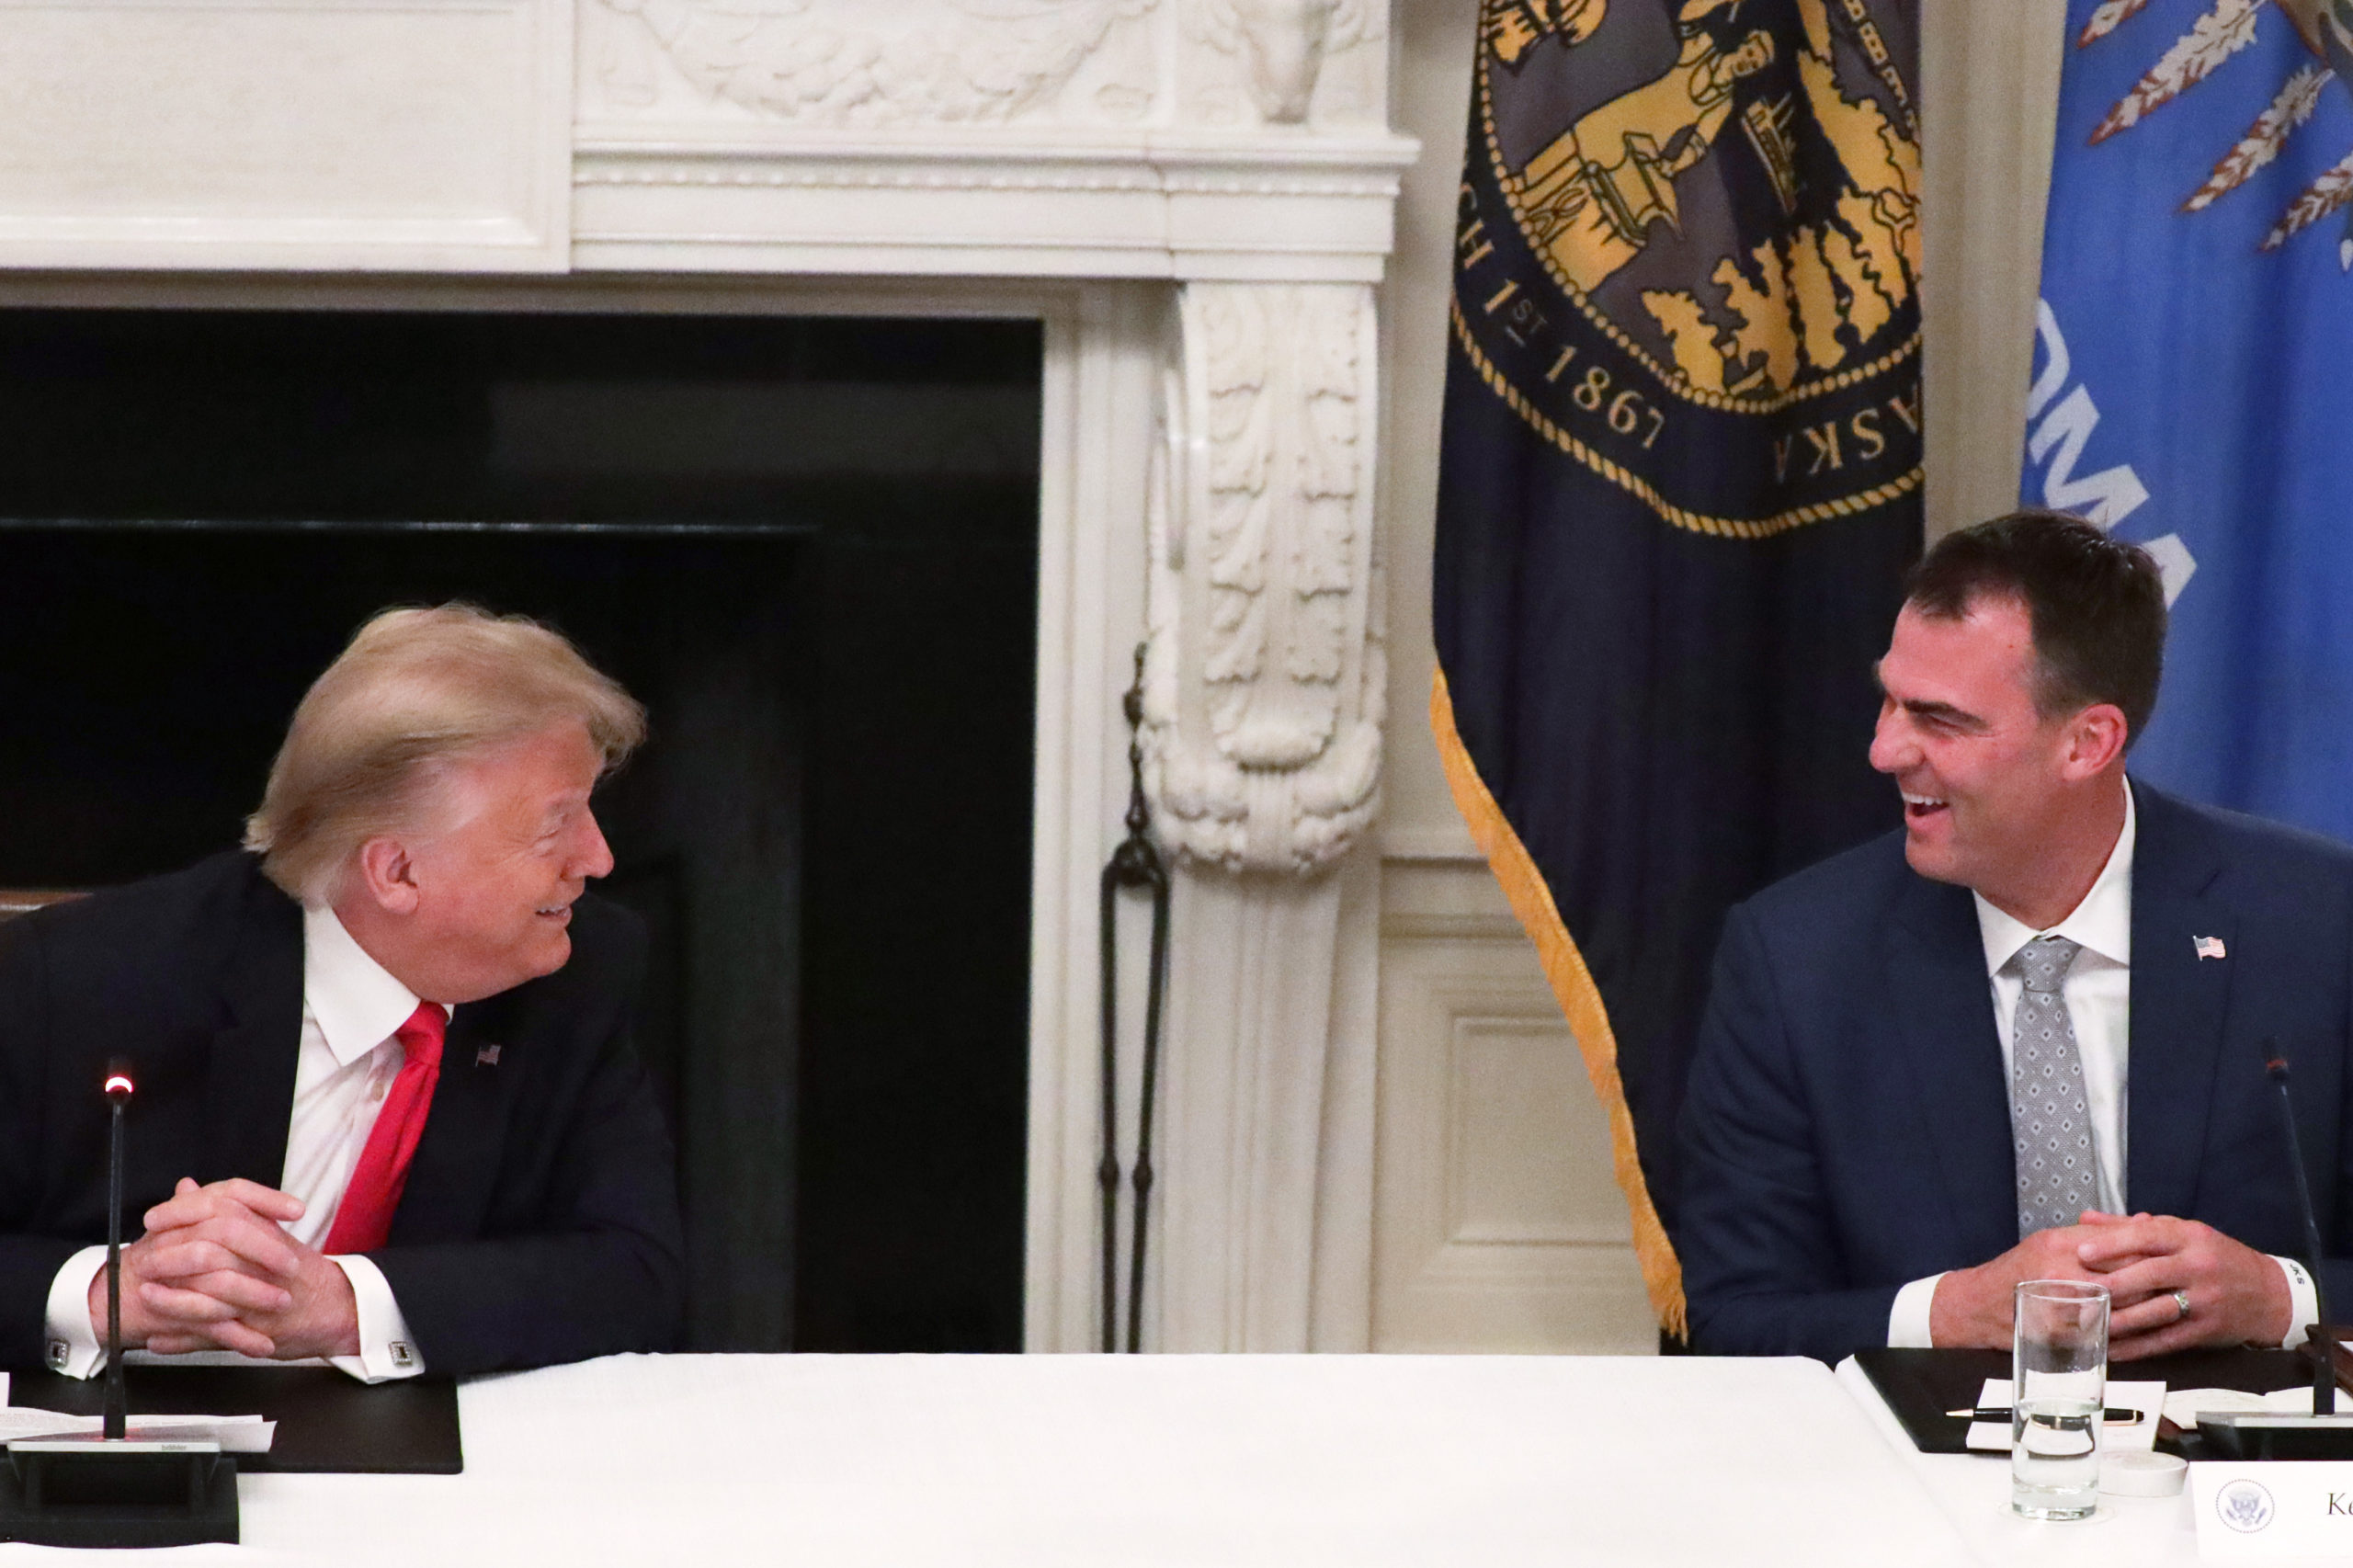 WASHINGTON, DC - JUNE 18: U.S. President Donald Trump listens as Governor Kevin Stitt (R-OK) speaks during a roundtable at the State Dining Room of the White House June 18, 2020 in Washington, DC. President Trump held a roundtable discussion with Governors and small business owners on the reopening of American’s small business. (Photo by Alex Wong/Getty Images)